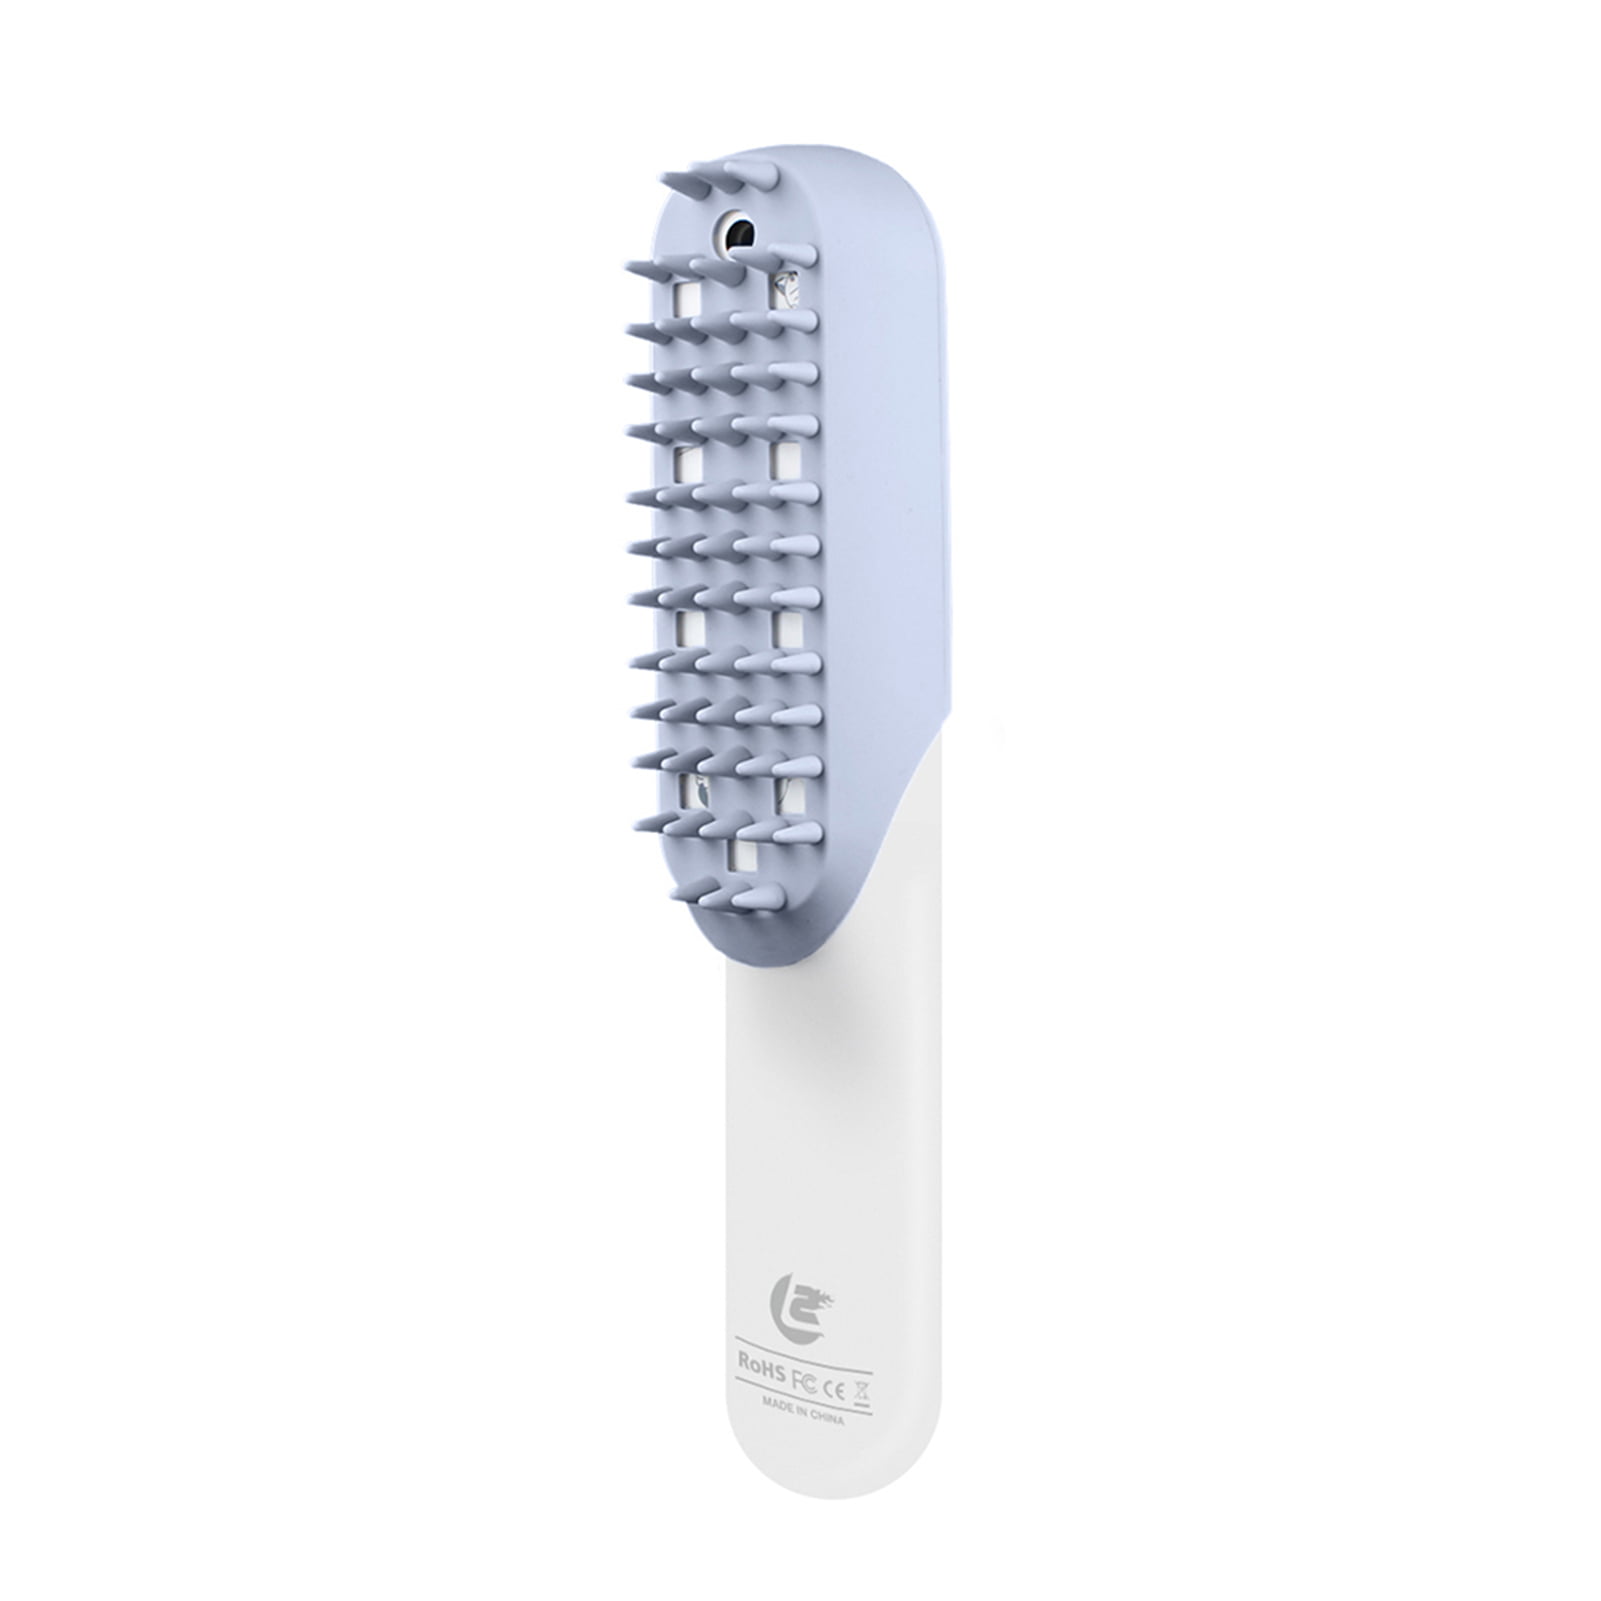 Pet Brush Dog Brush Cat Brush 2 in 1 Pet Hair Comb Natural Deodorant Comb and Cleaner Comb Electronic Antibacterial Deodorization Brush Health Effective Grooming Comb for Dogs Cats 